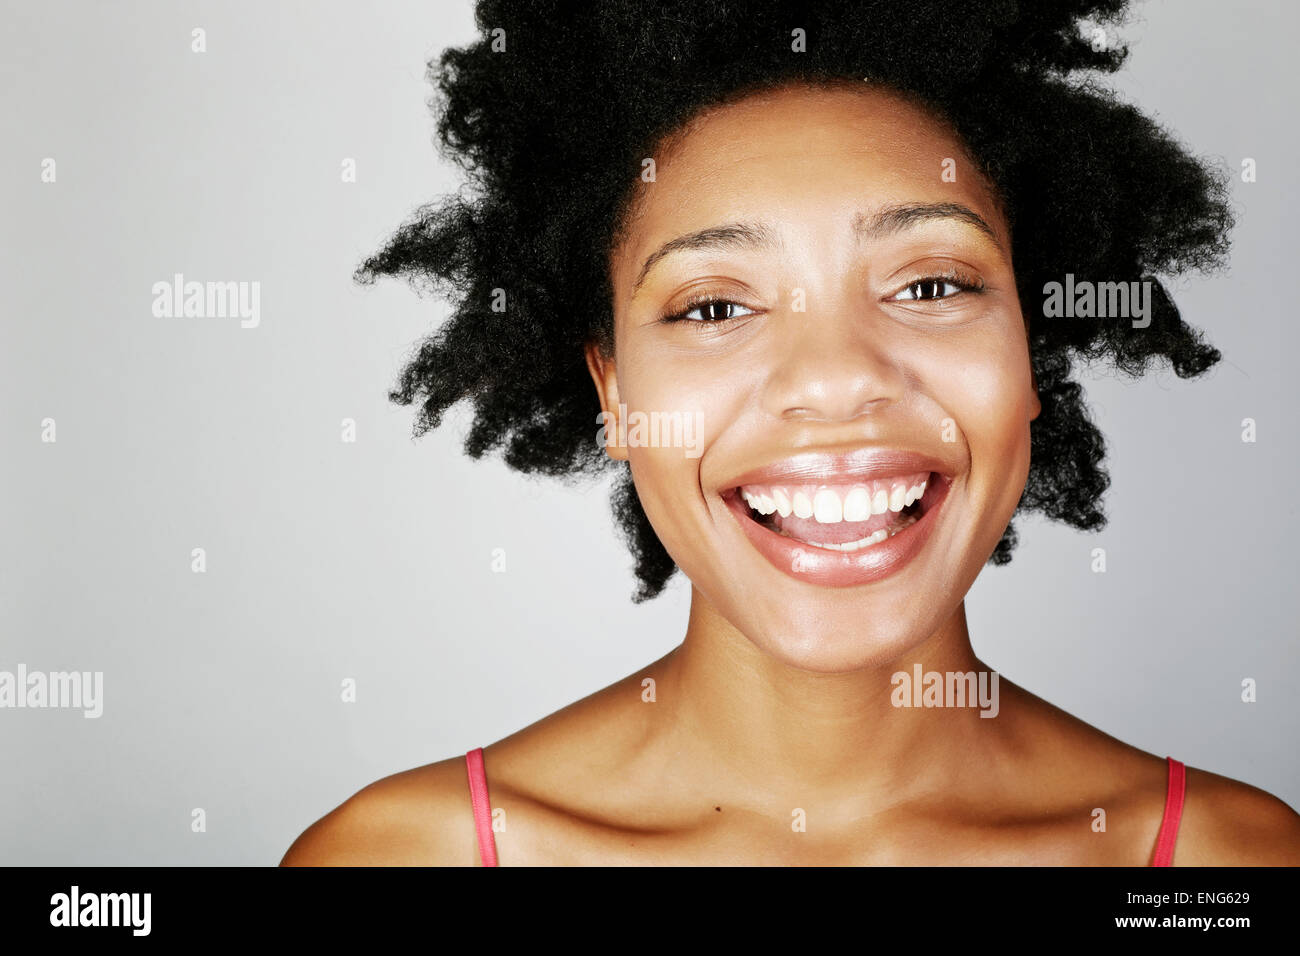 Close up of face of laughing black woman Stock Photo